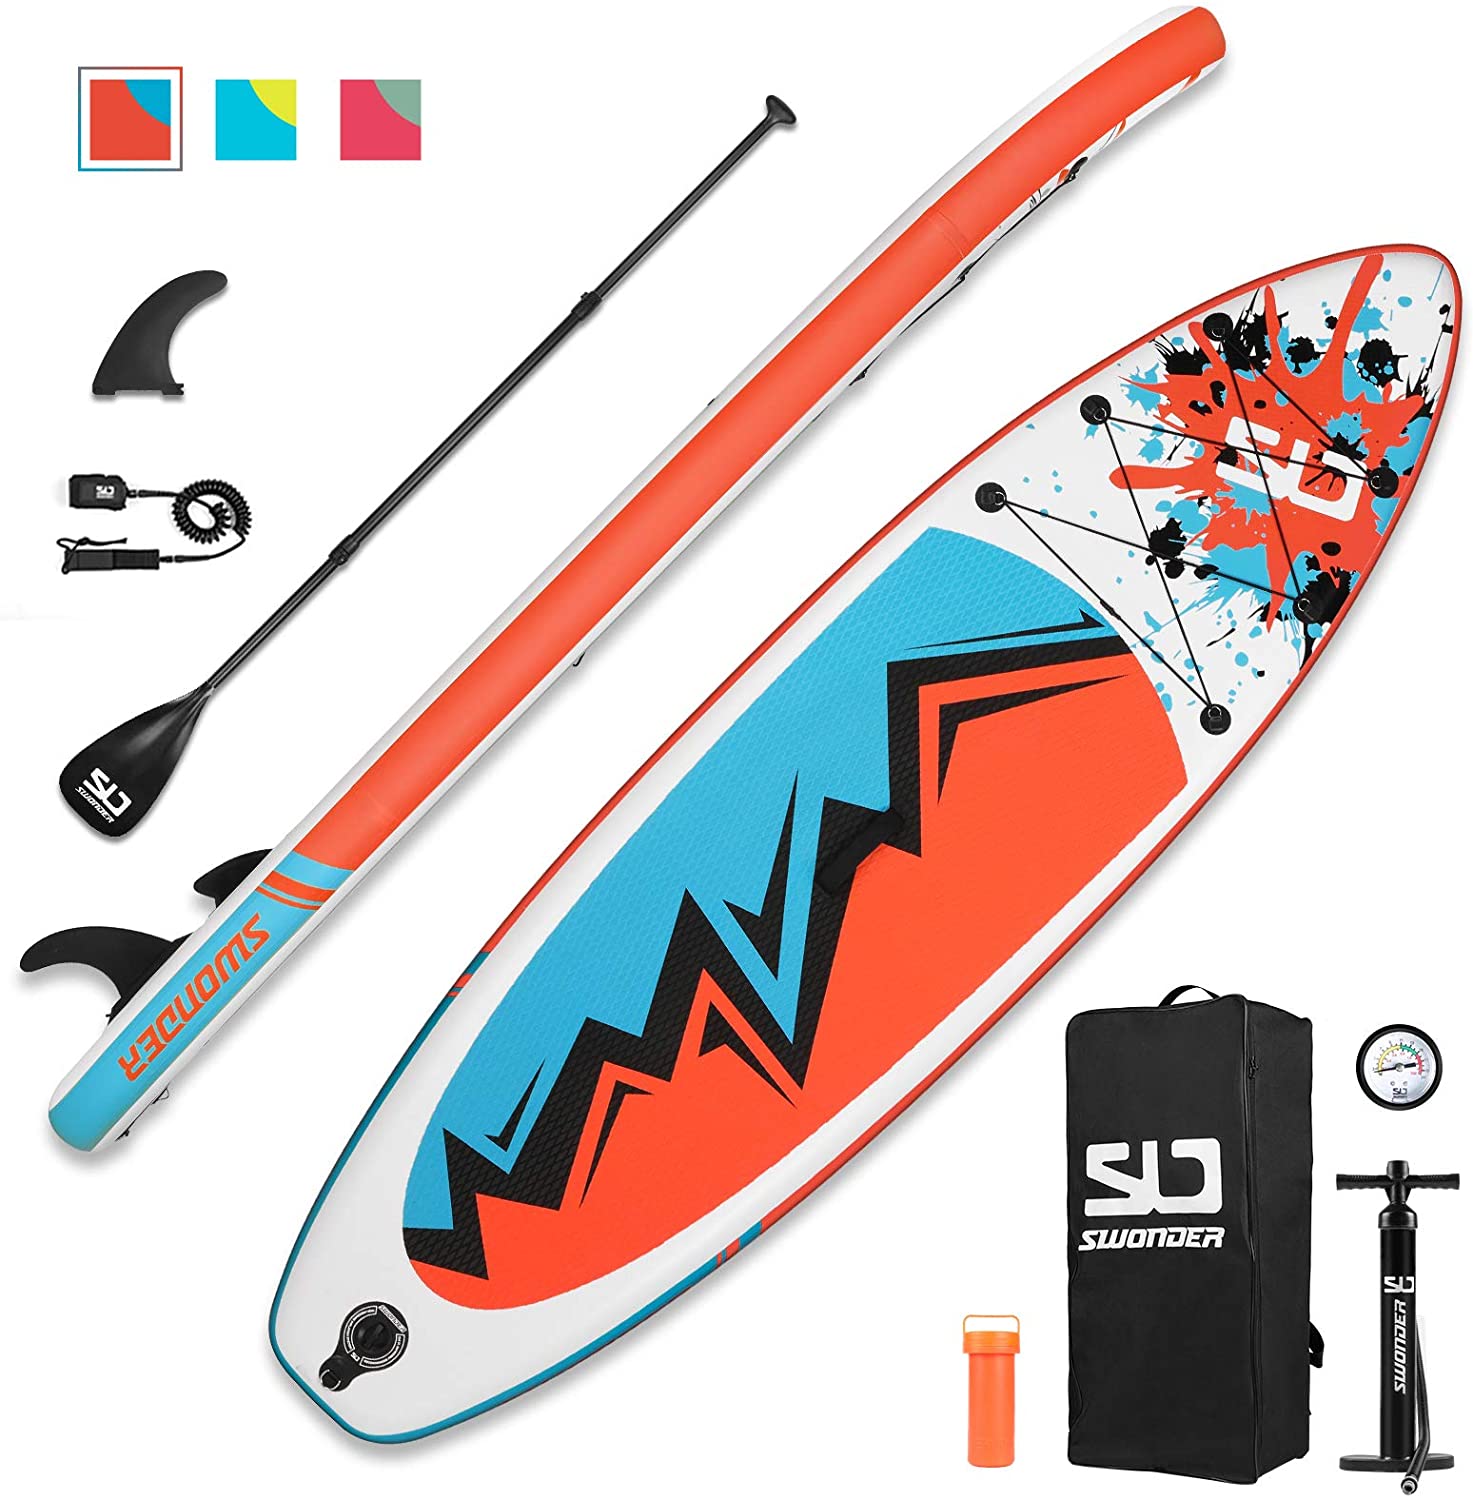 Swonder Inflatable Stand Up Paddle Board, 32" Wide Ultra Steady and Super Light-Weight (7.8kg) Board